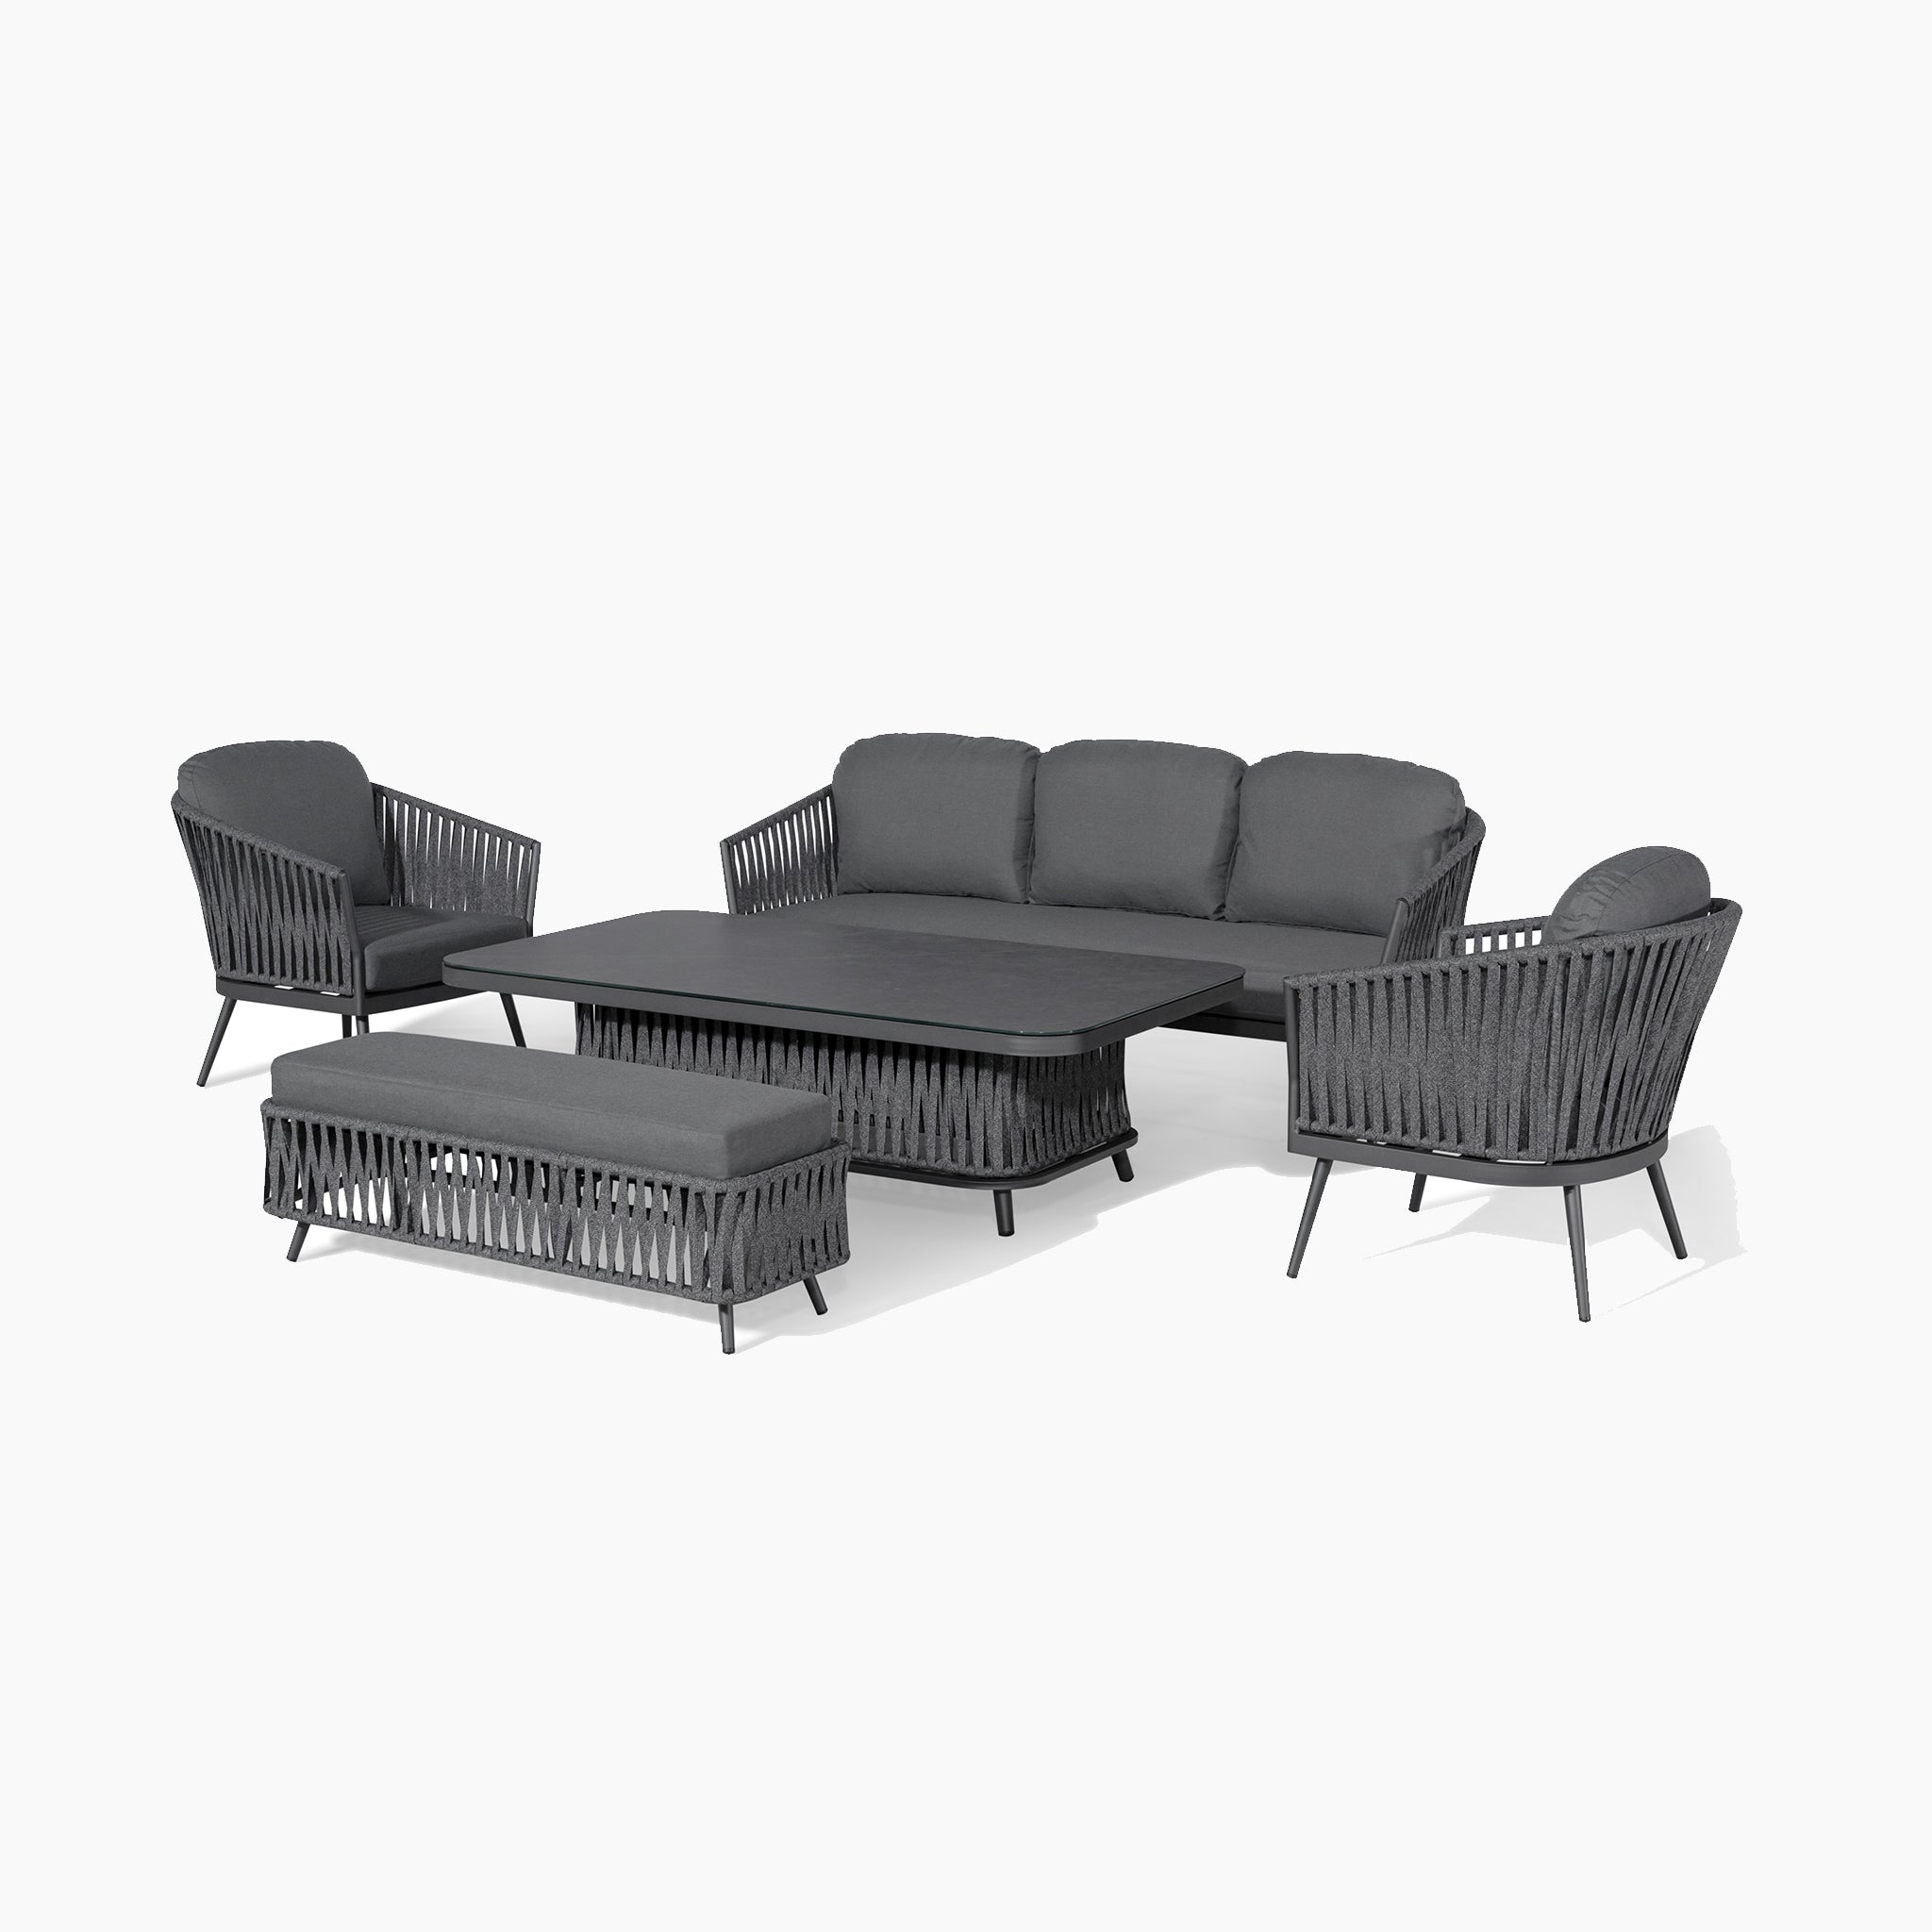 Monterrey 3 Seat Rope Sofa Set with Rising Table in Grey